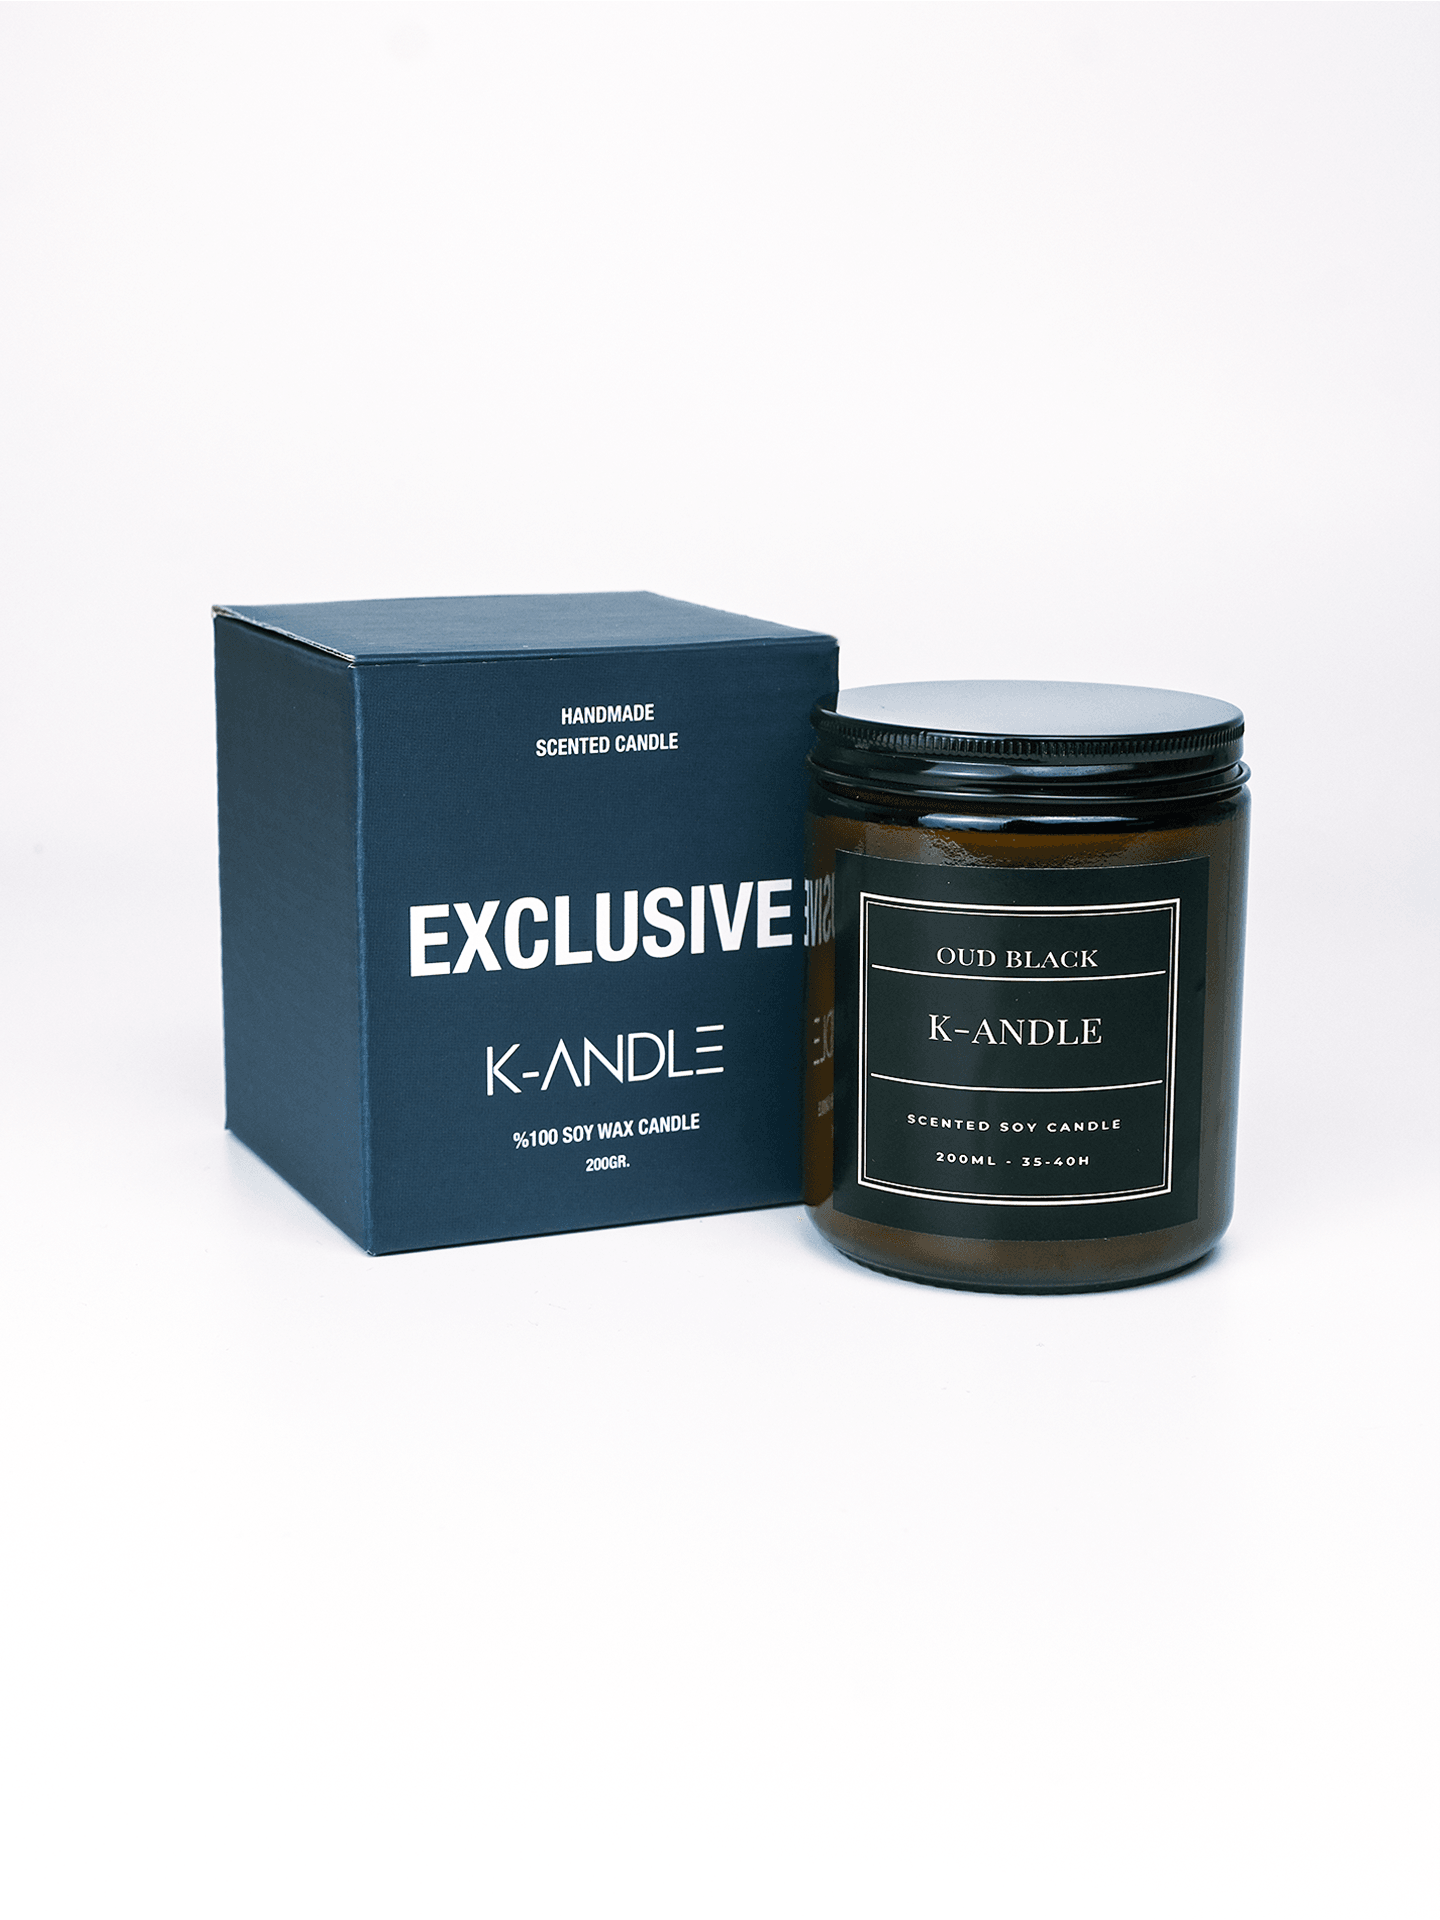 Oud Black Scented Soy Candle